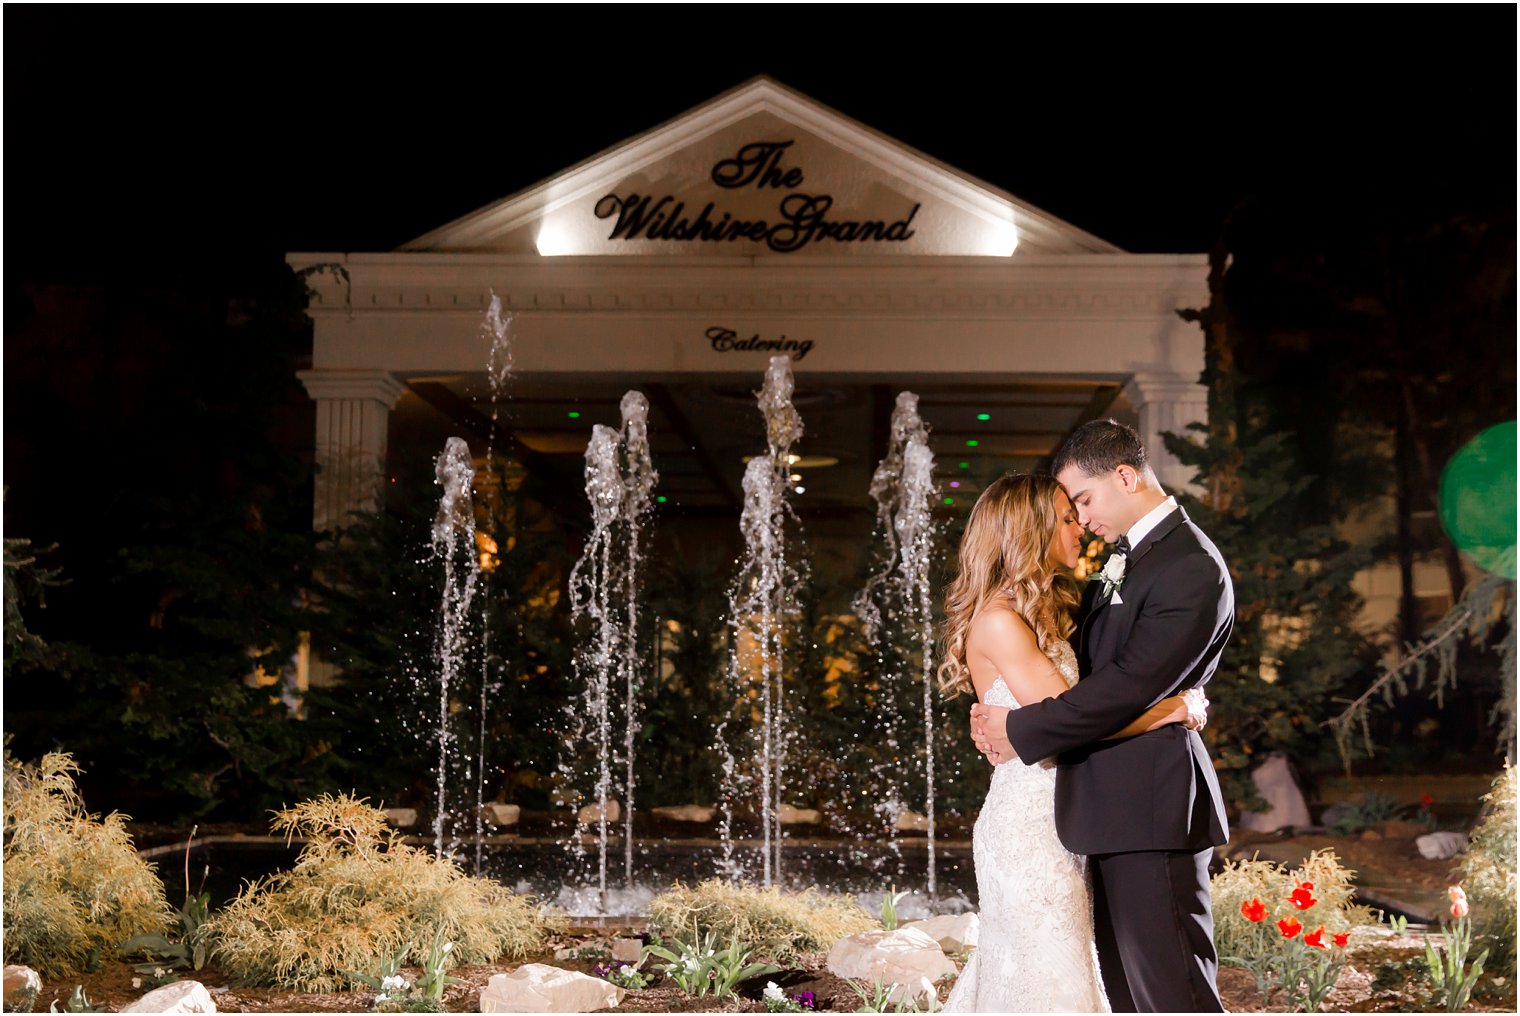 Night photo of bride and groom at Wilshire Grand Hotel | Photos by Idalia Photography